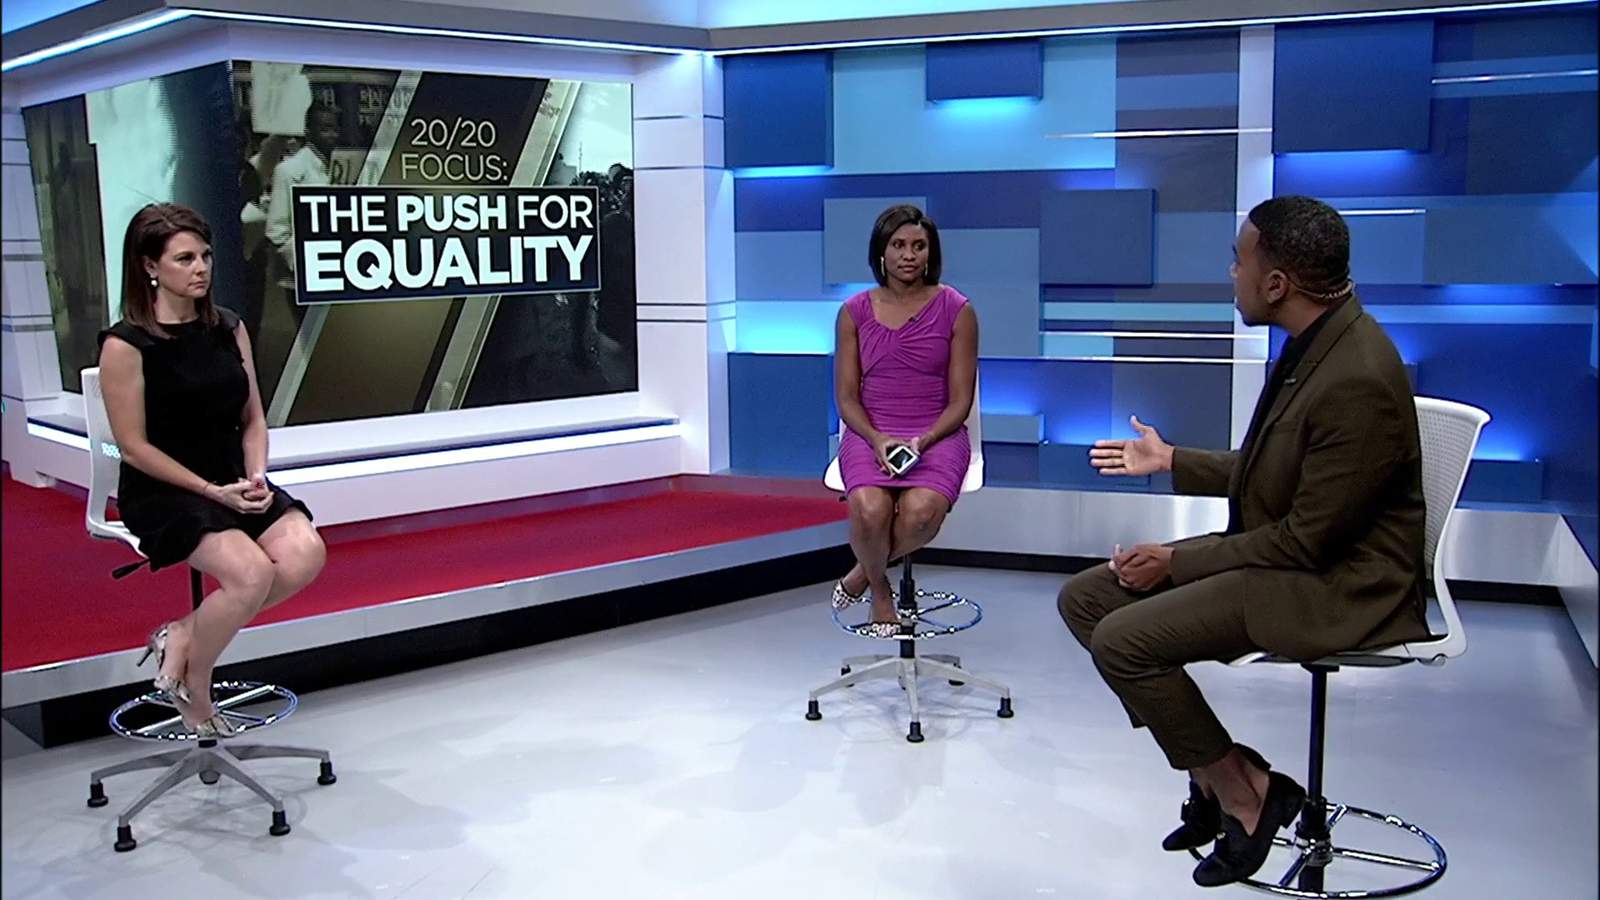 Post-show conversation: 20/20 Focus: The Push for Equality